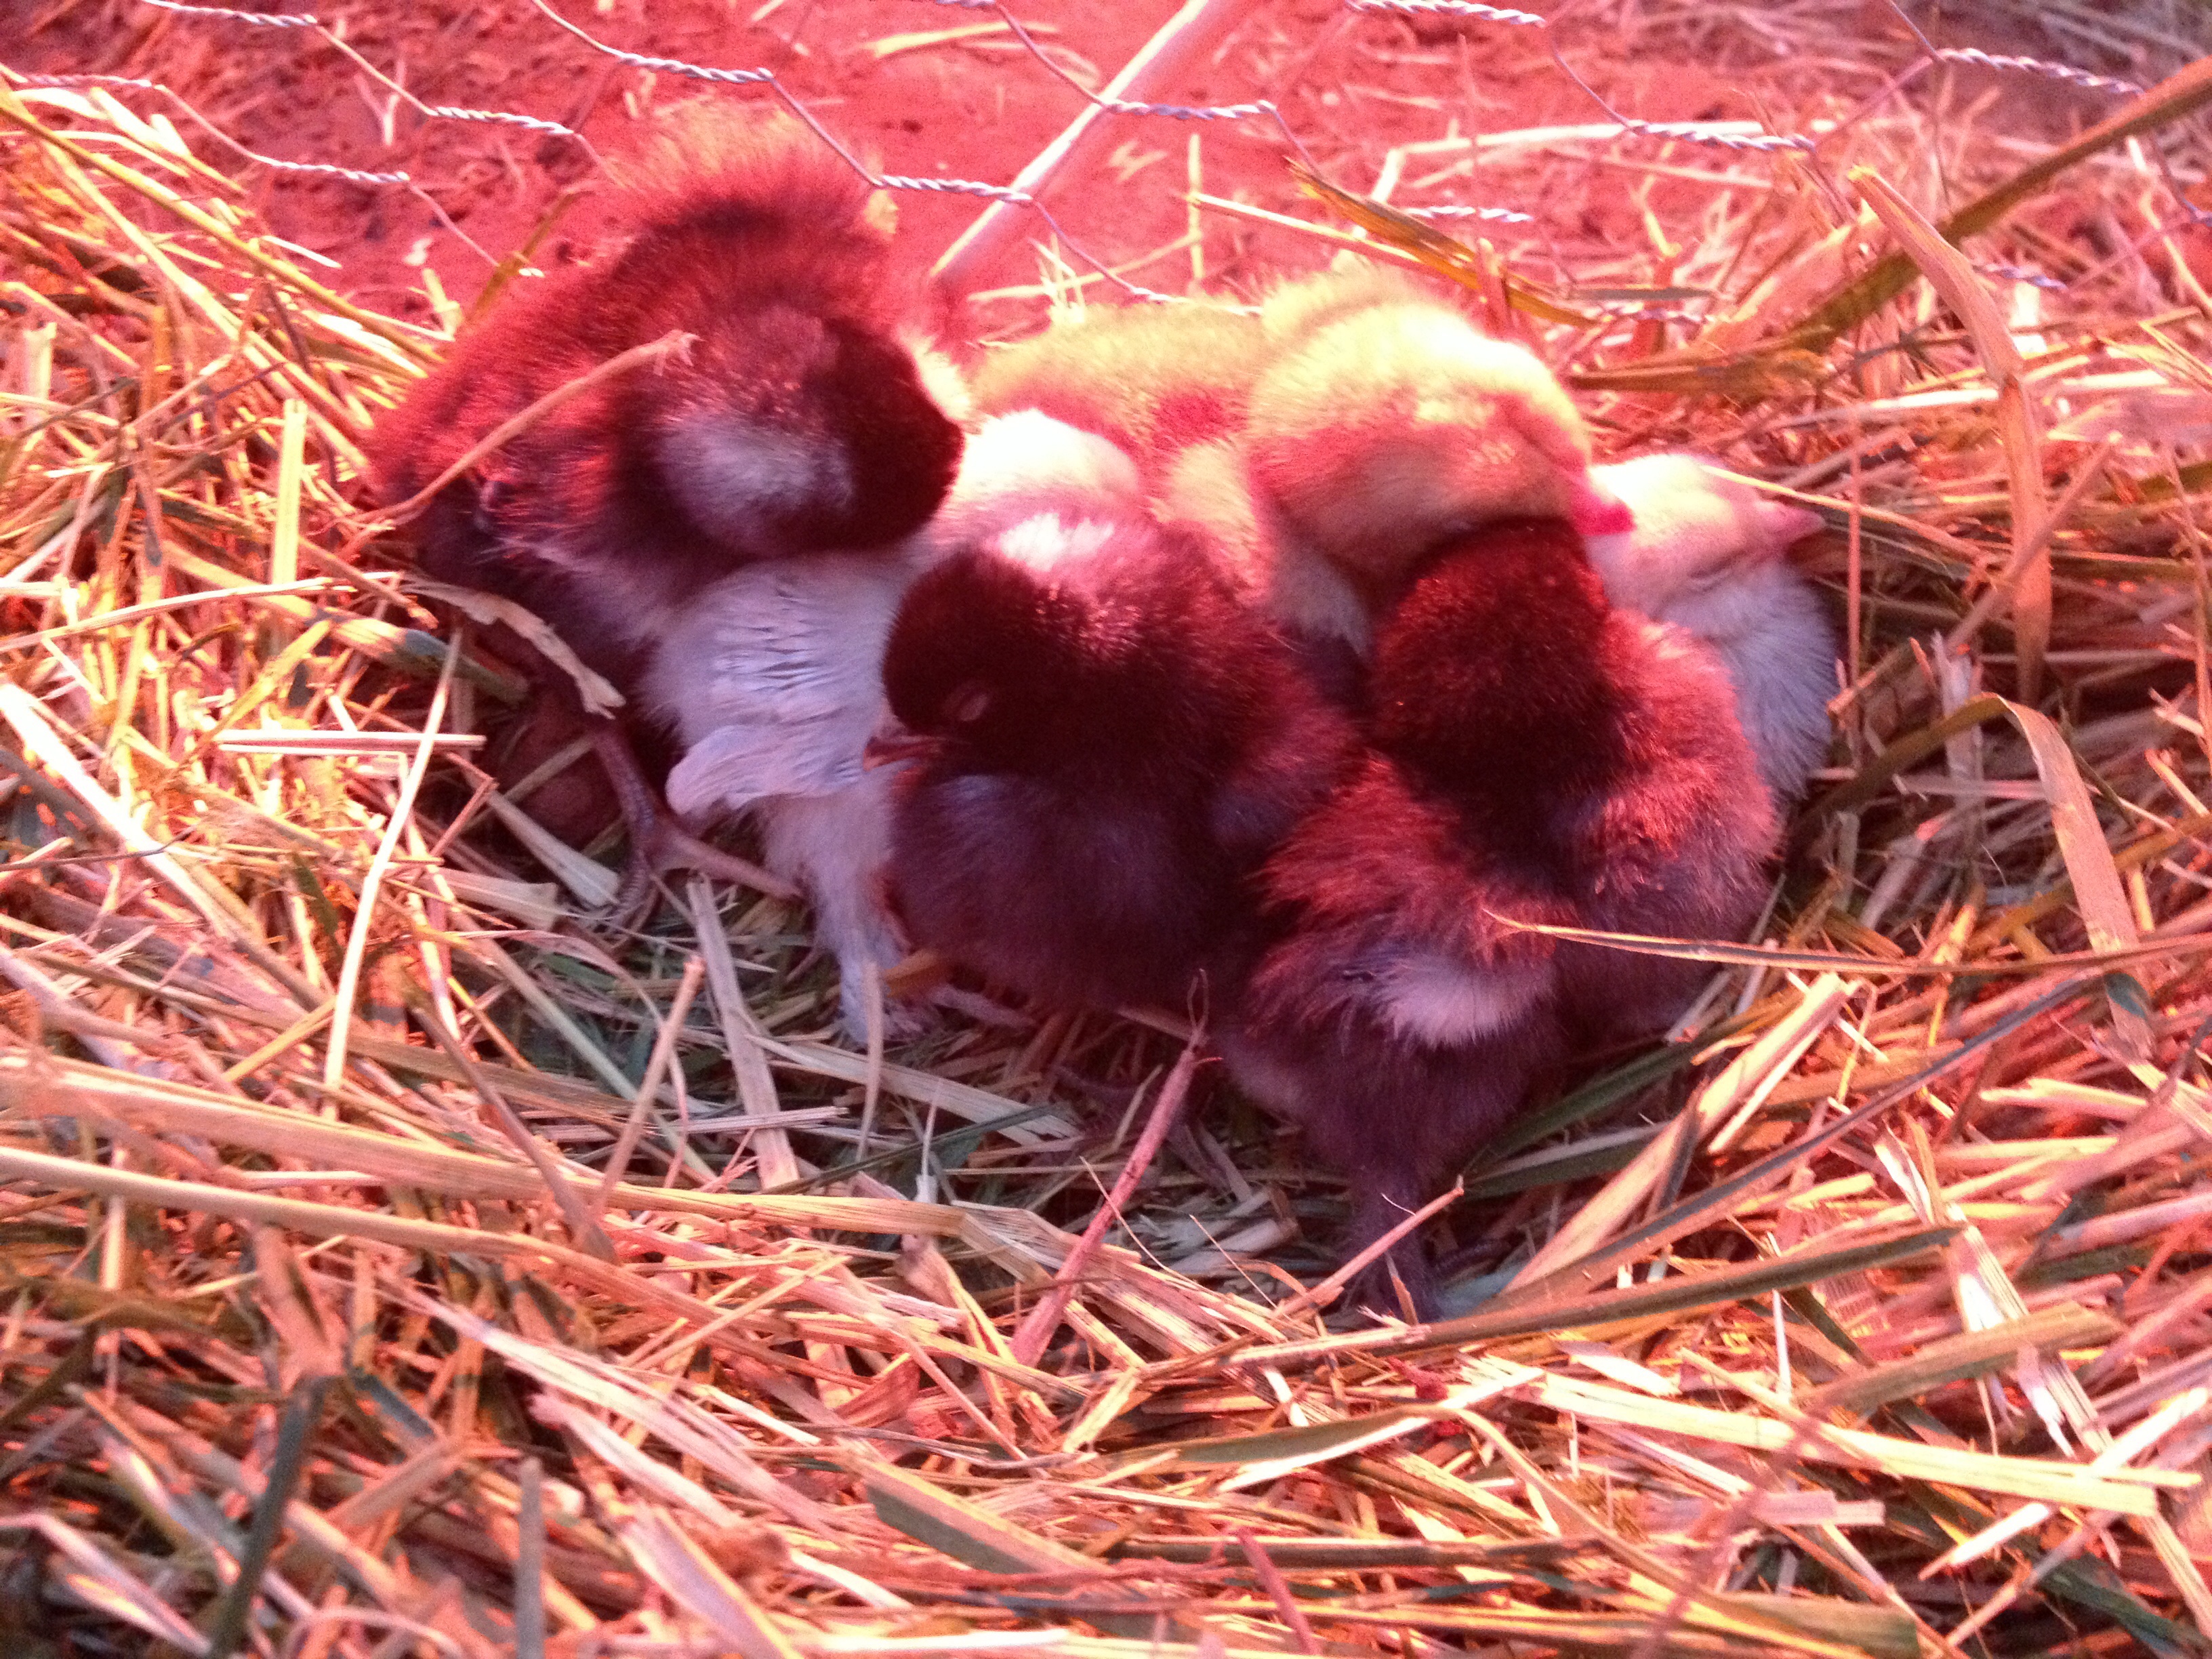 Second night nice and cozy by the heat lamp! 4/23/2014